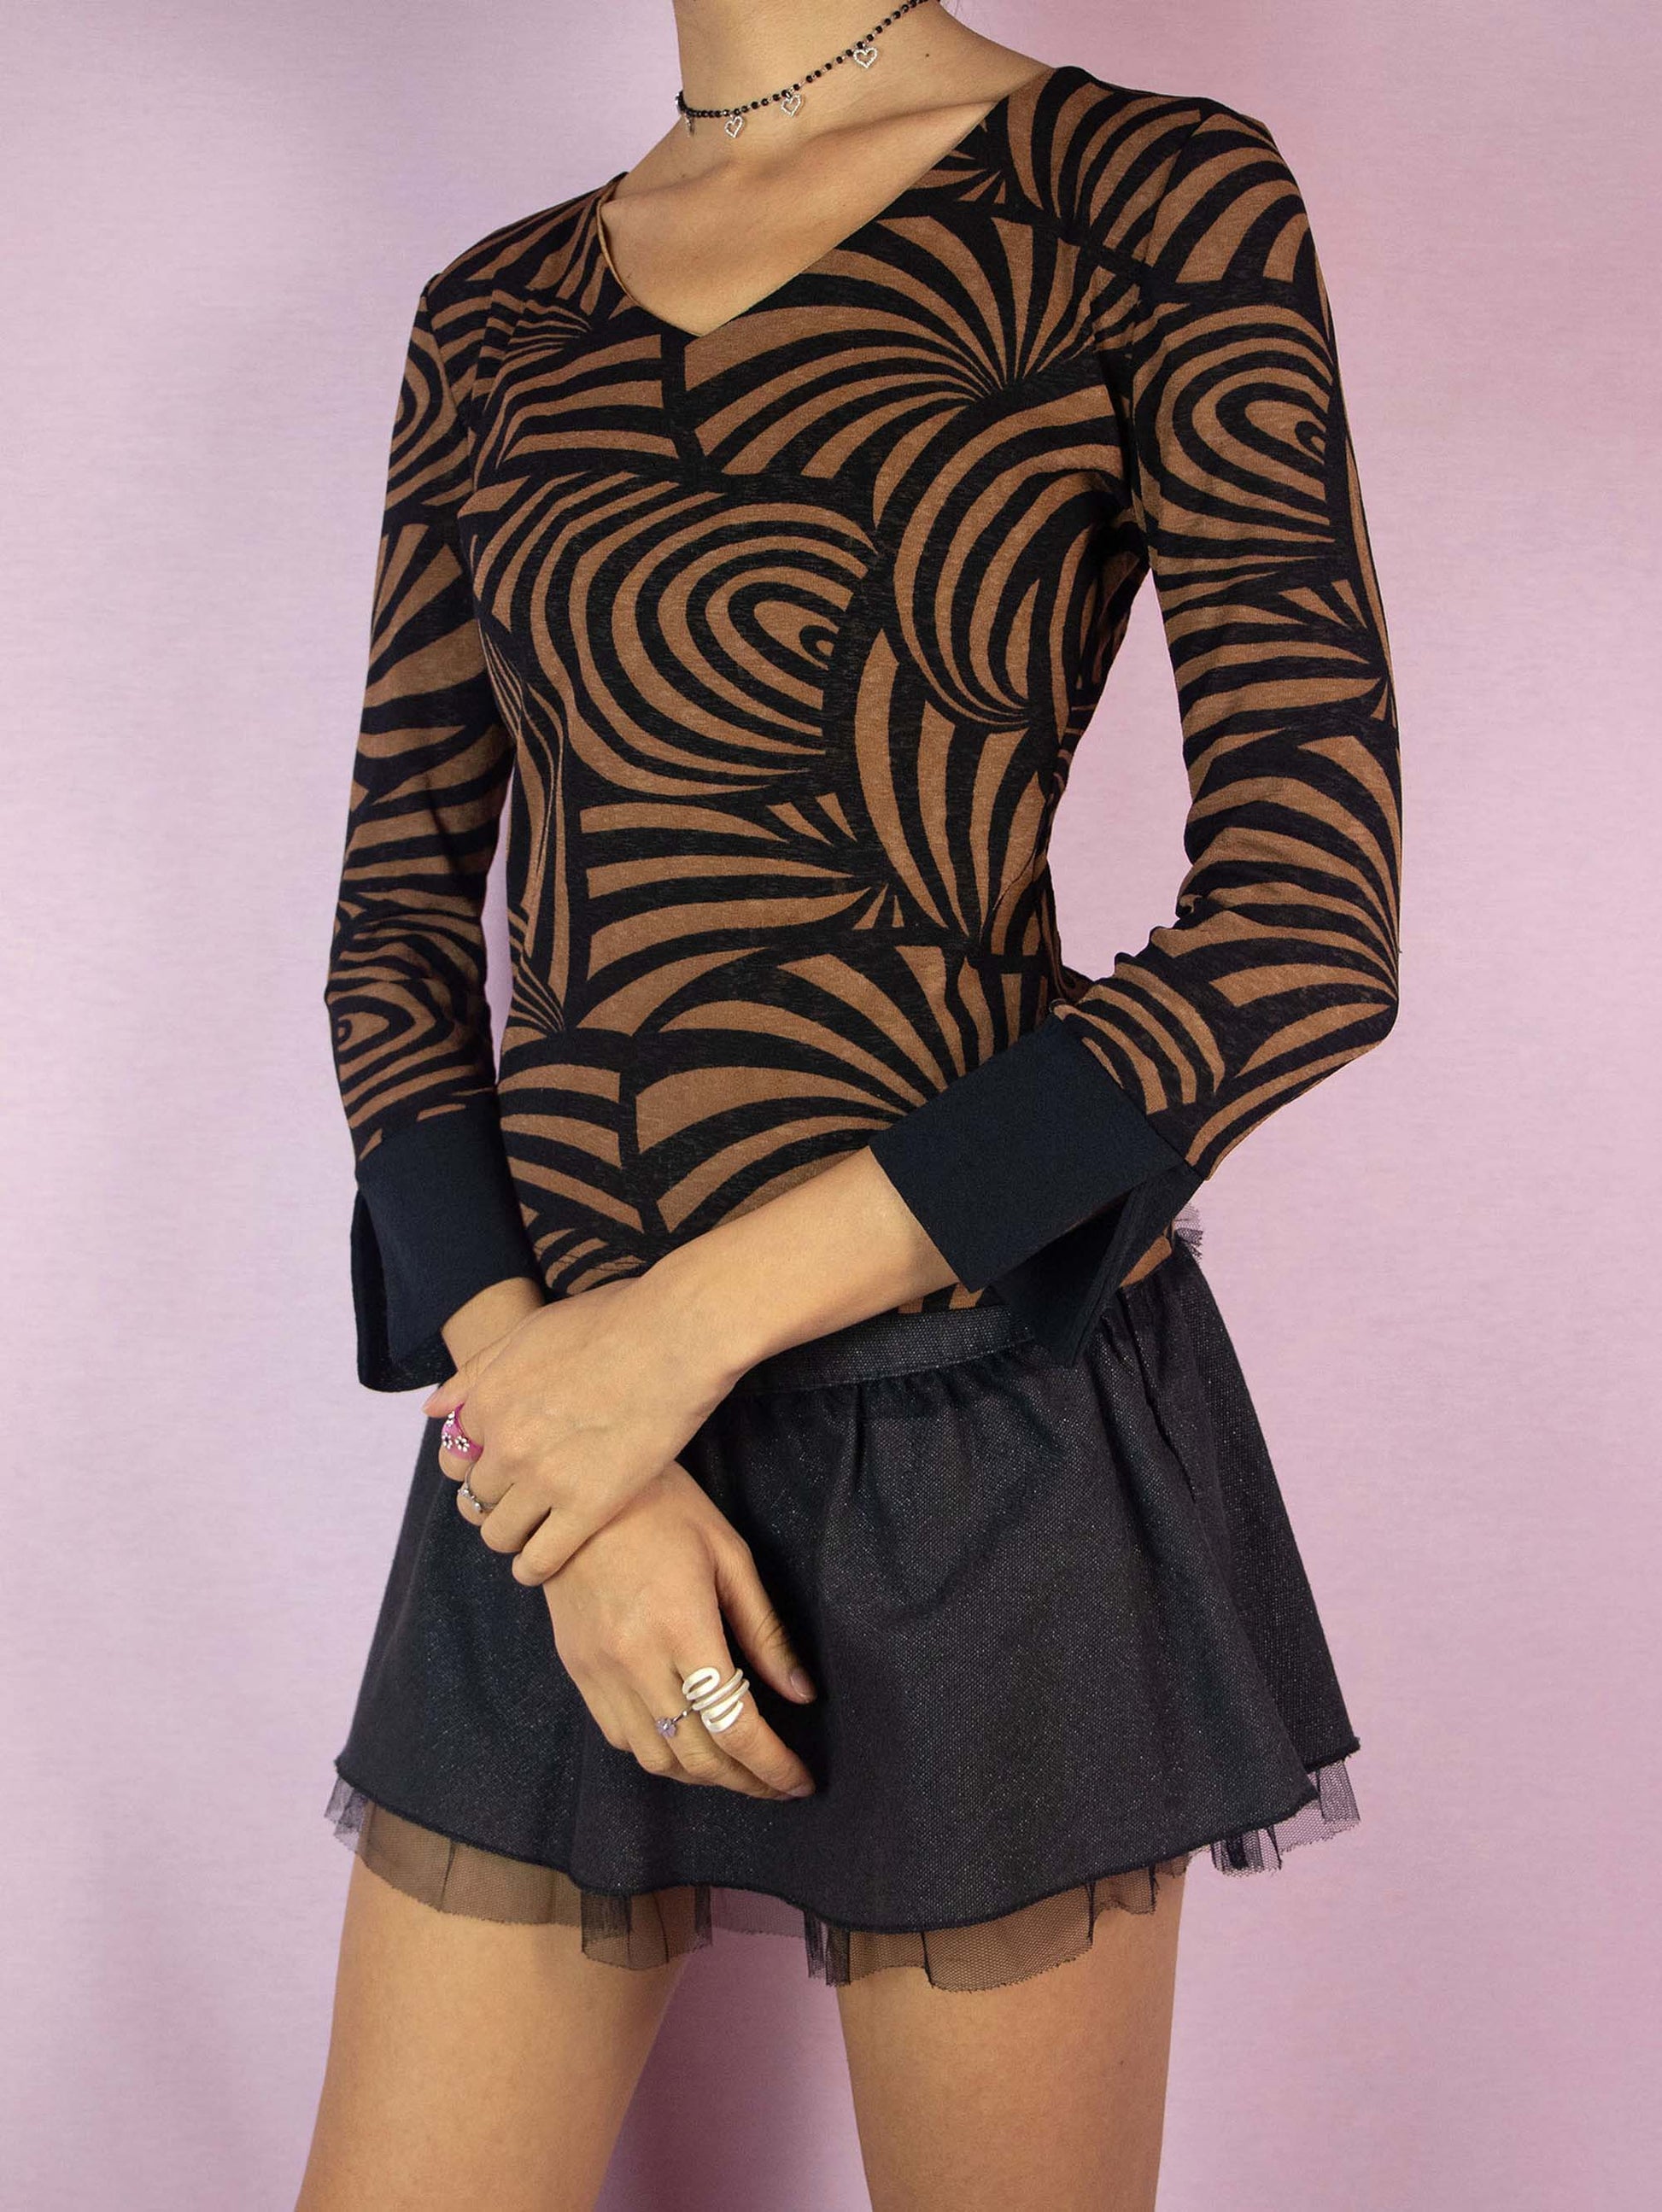 The Y2K Abstract Printed Mesh Top is a vintage 2000s brown and black three-quarter sleeve shirt with a swirl stripe graphic and V-neckline.